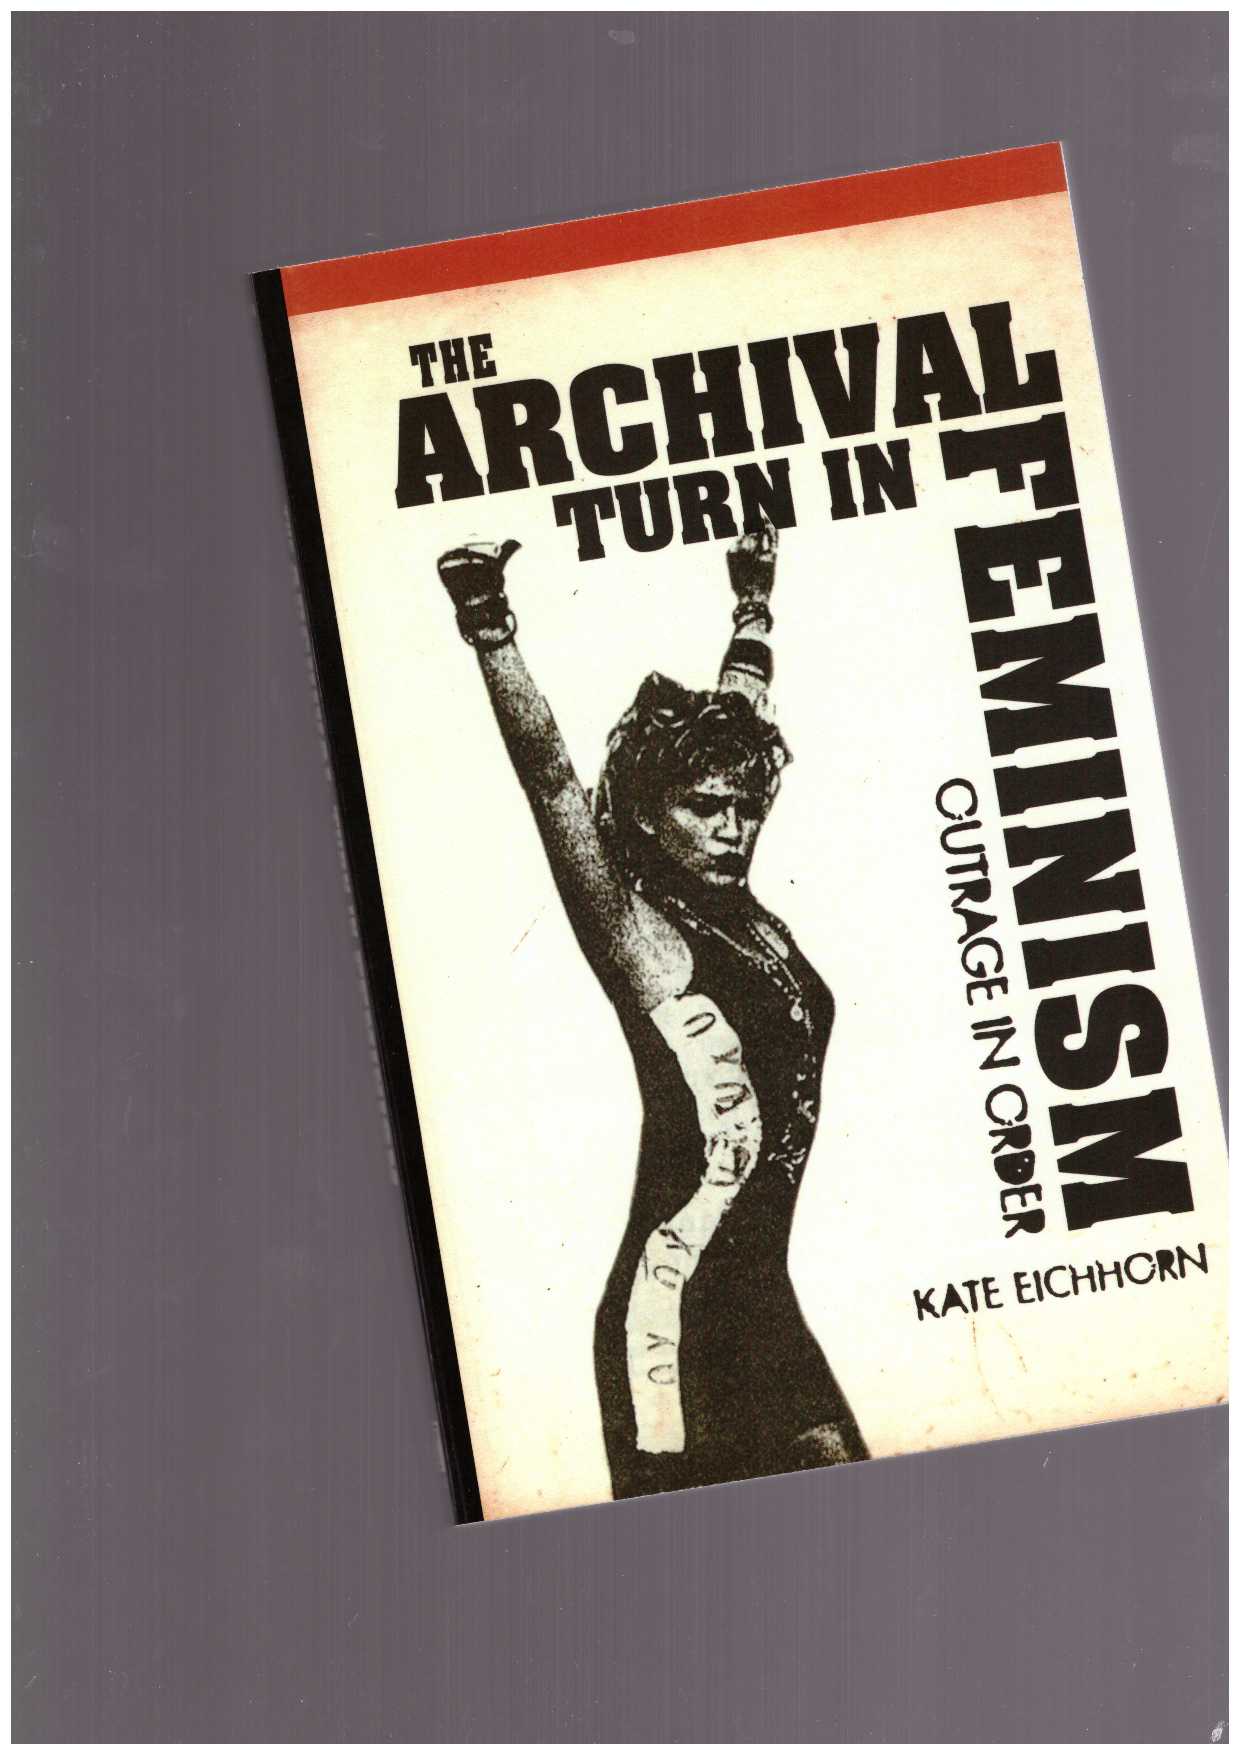 EICHHORN, Kate - The Archival Turn in Feminism. Outrage in Order